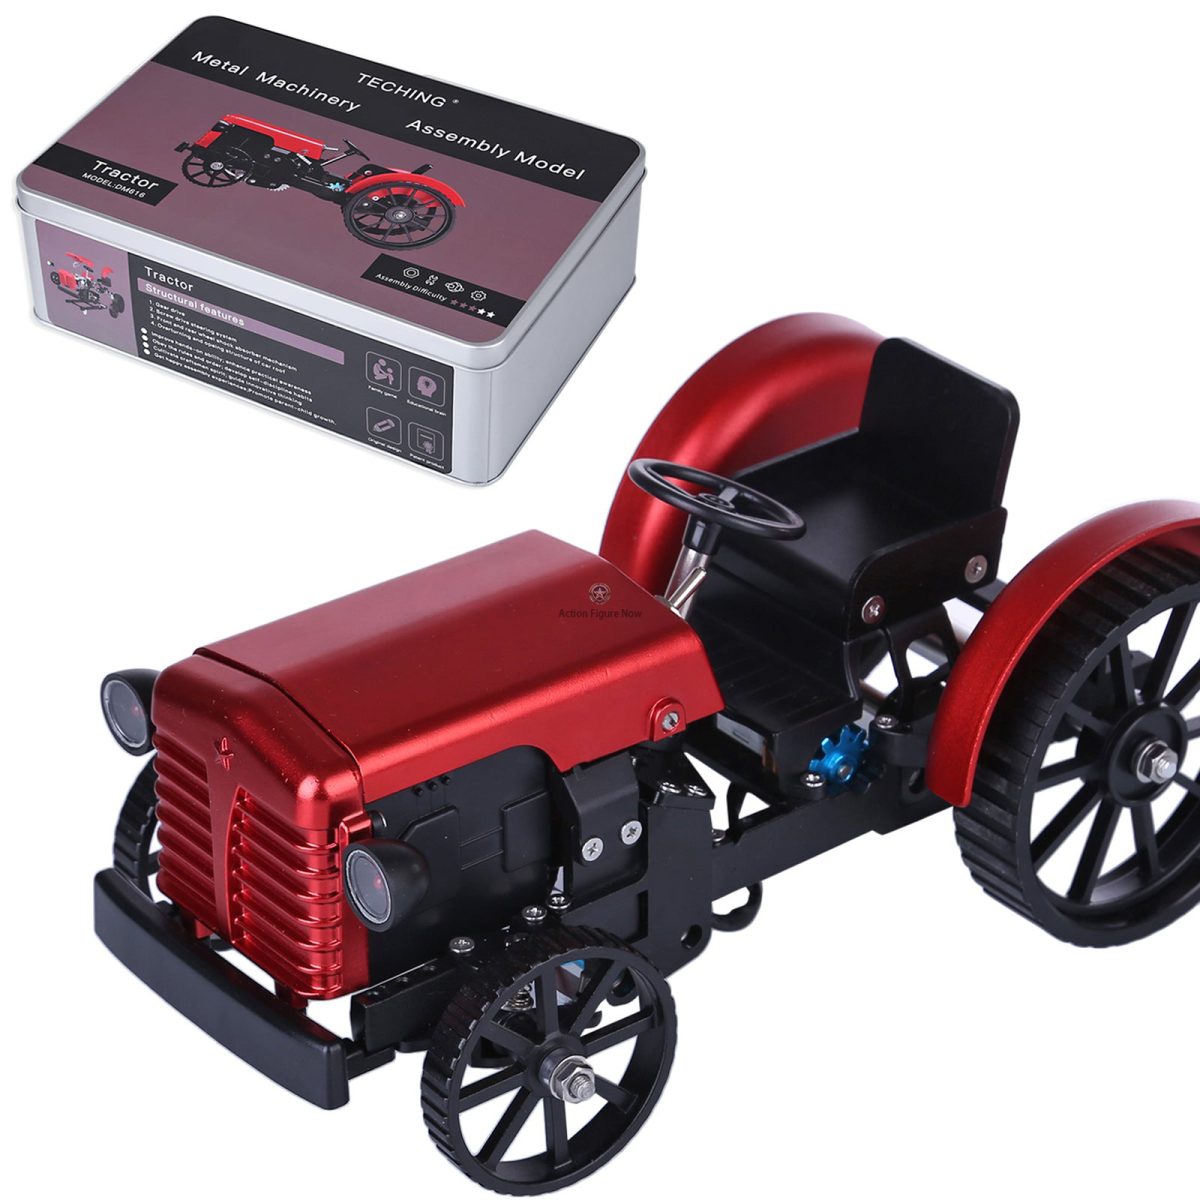 Teching Mini RC Tractor Assembly Kit: Educational Metal RC Hobby Model in Red